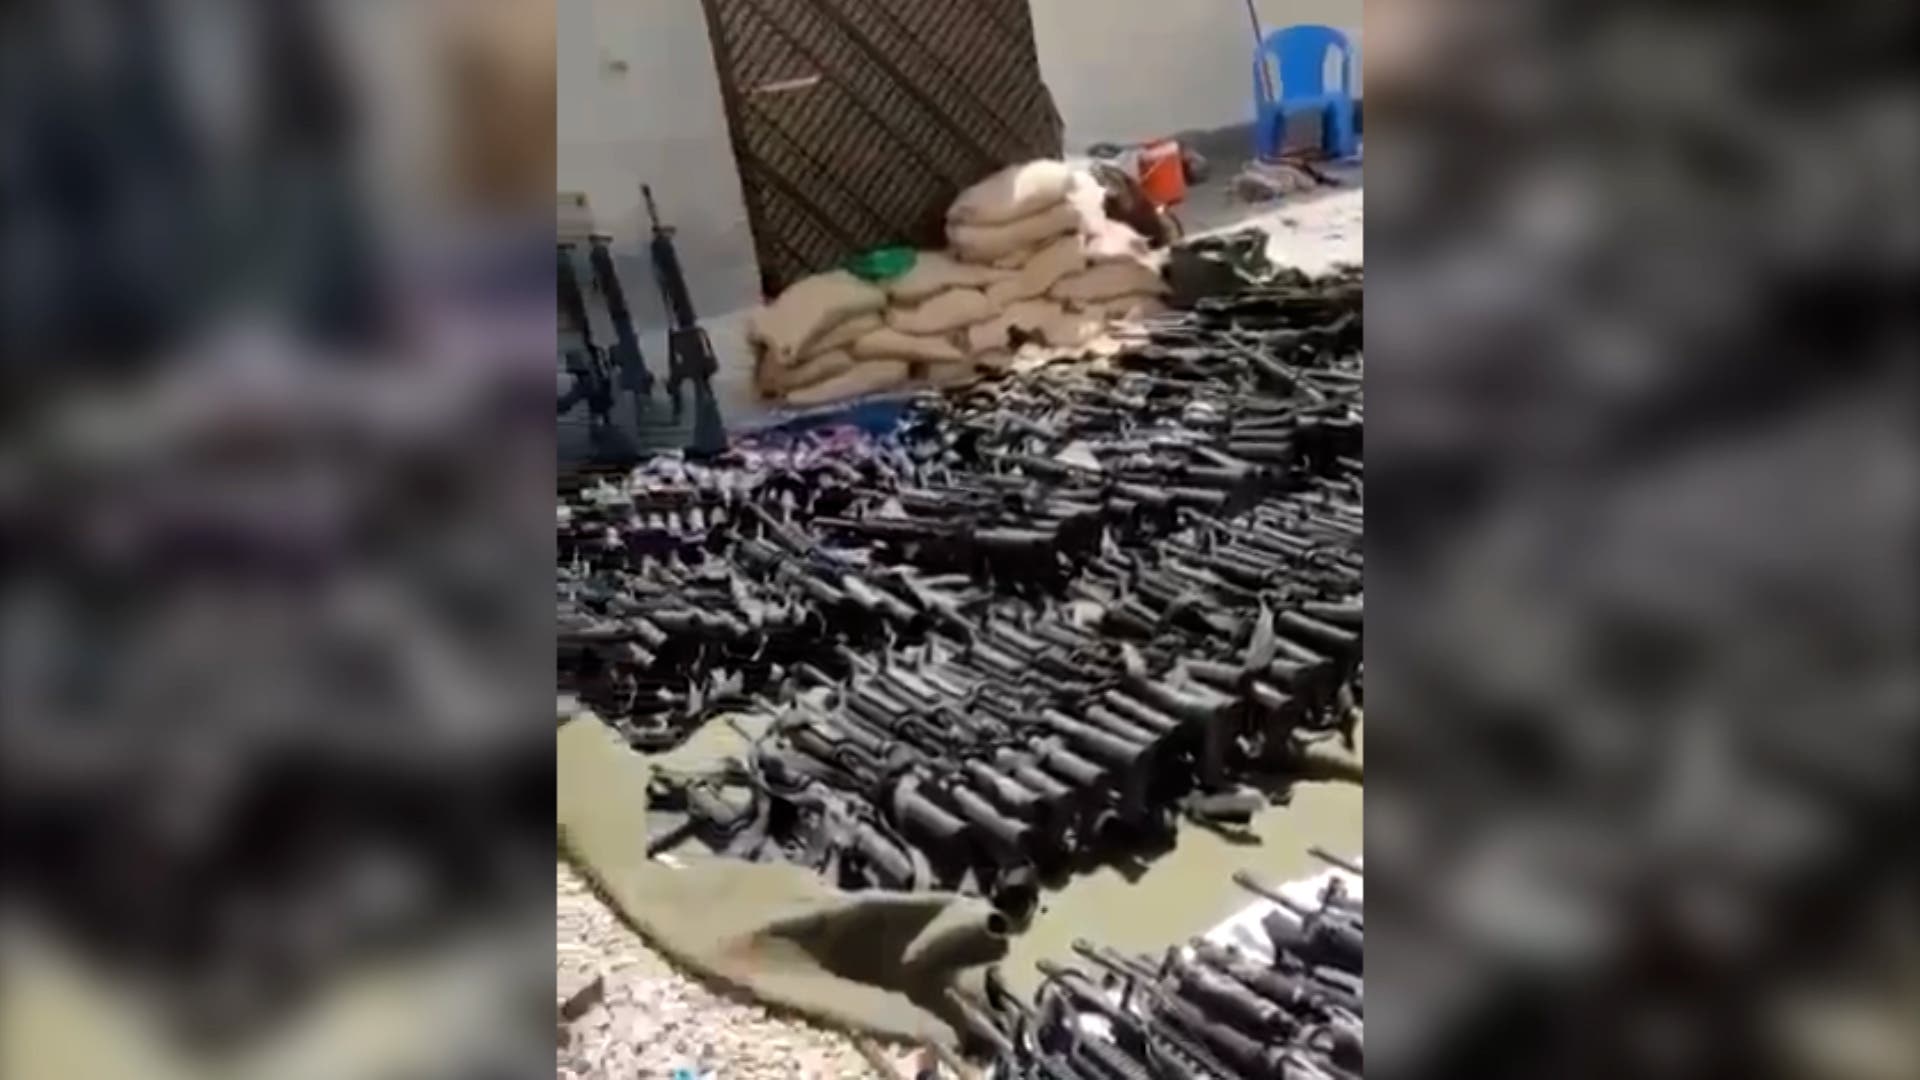 US-supplied firearms seized by the Taliban. (Screengrab)